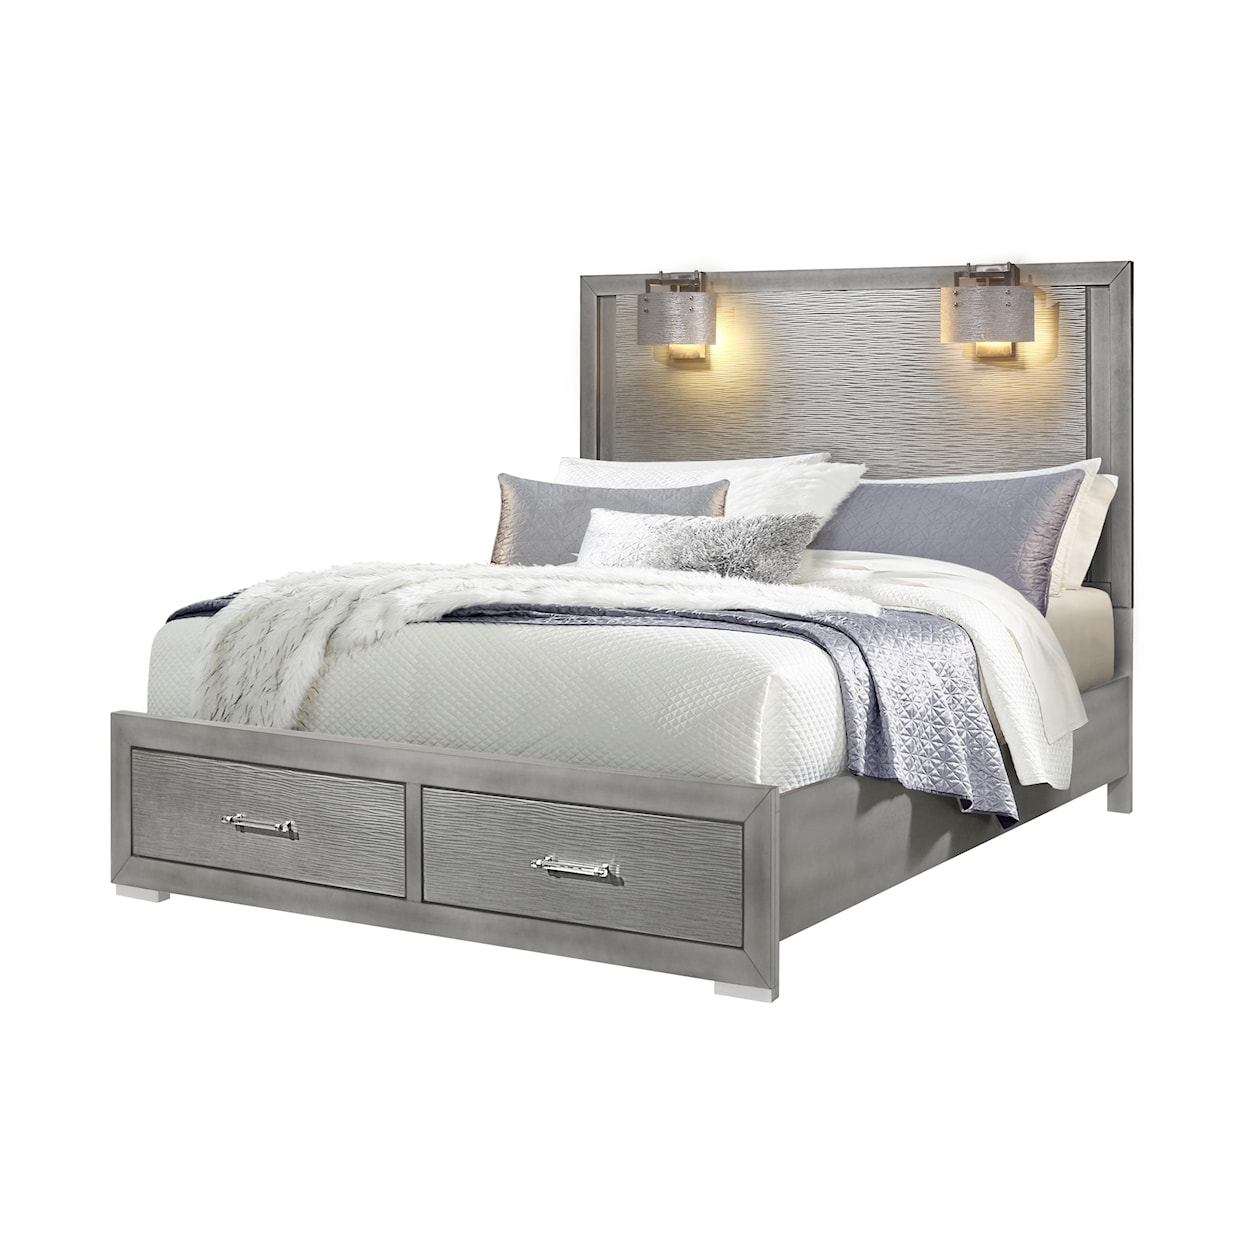 Global Furniture Tiffany King Storage Bed with Built-In Lamps